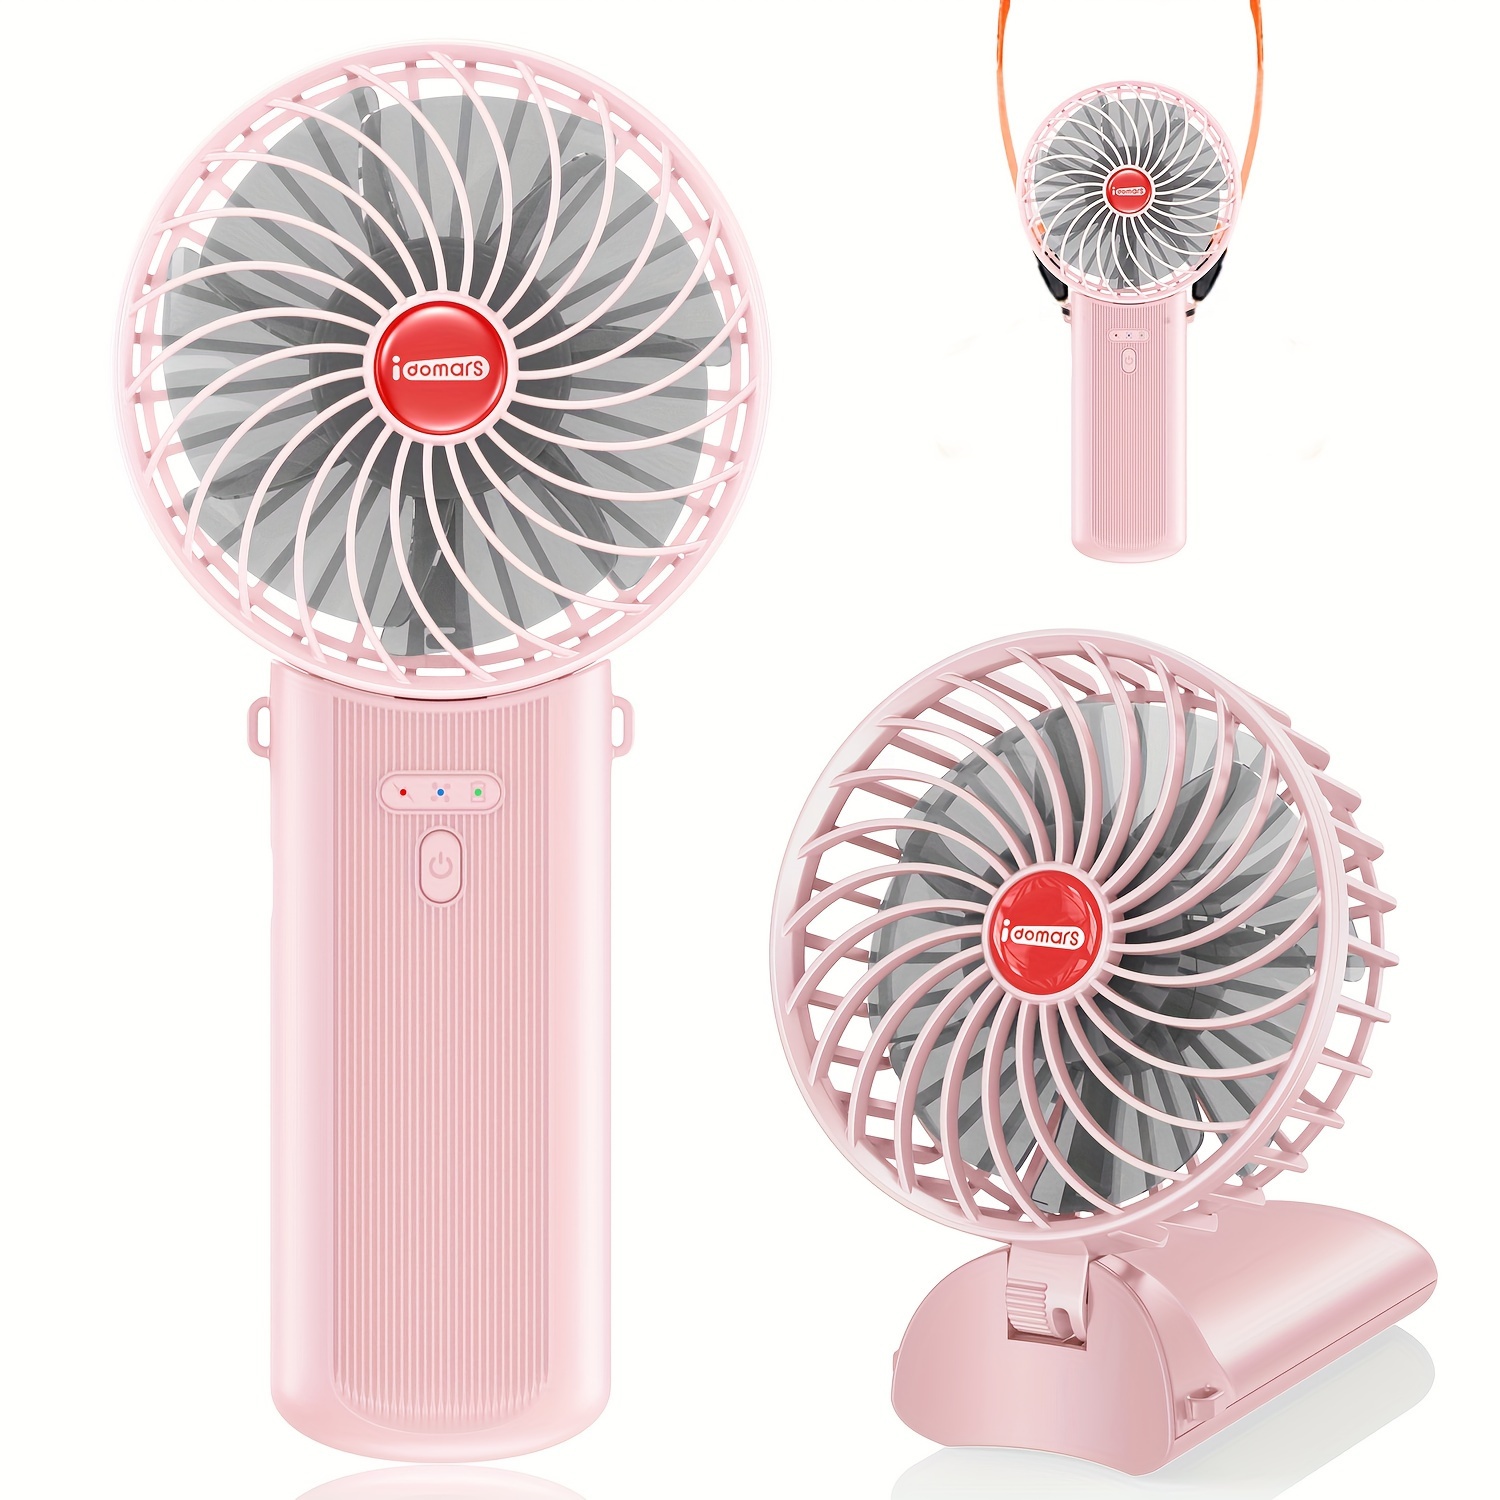 

Mini Usb Fan 4 Speeds Cool Portable Fan, 2000mah Powerful Handheld Fan Desk Fan With Led Display For Quiet Air Circulation In Indoor/outdoor Use For Fishing/camping/travel/school